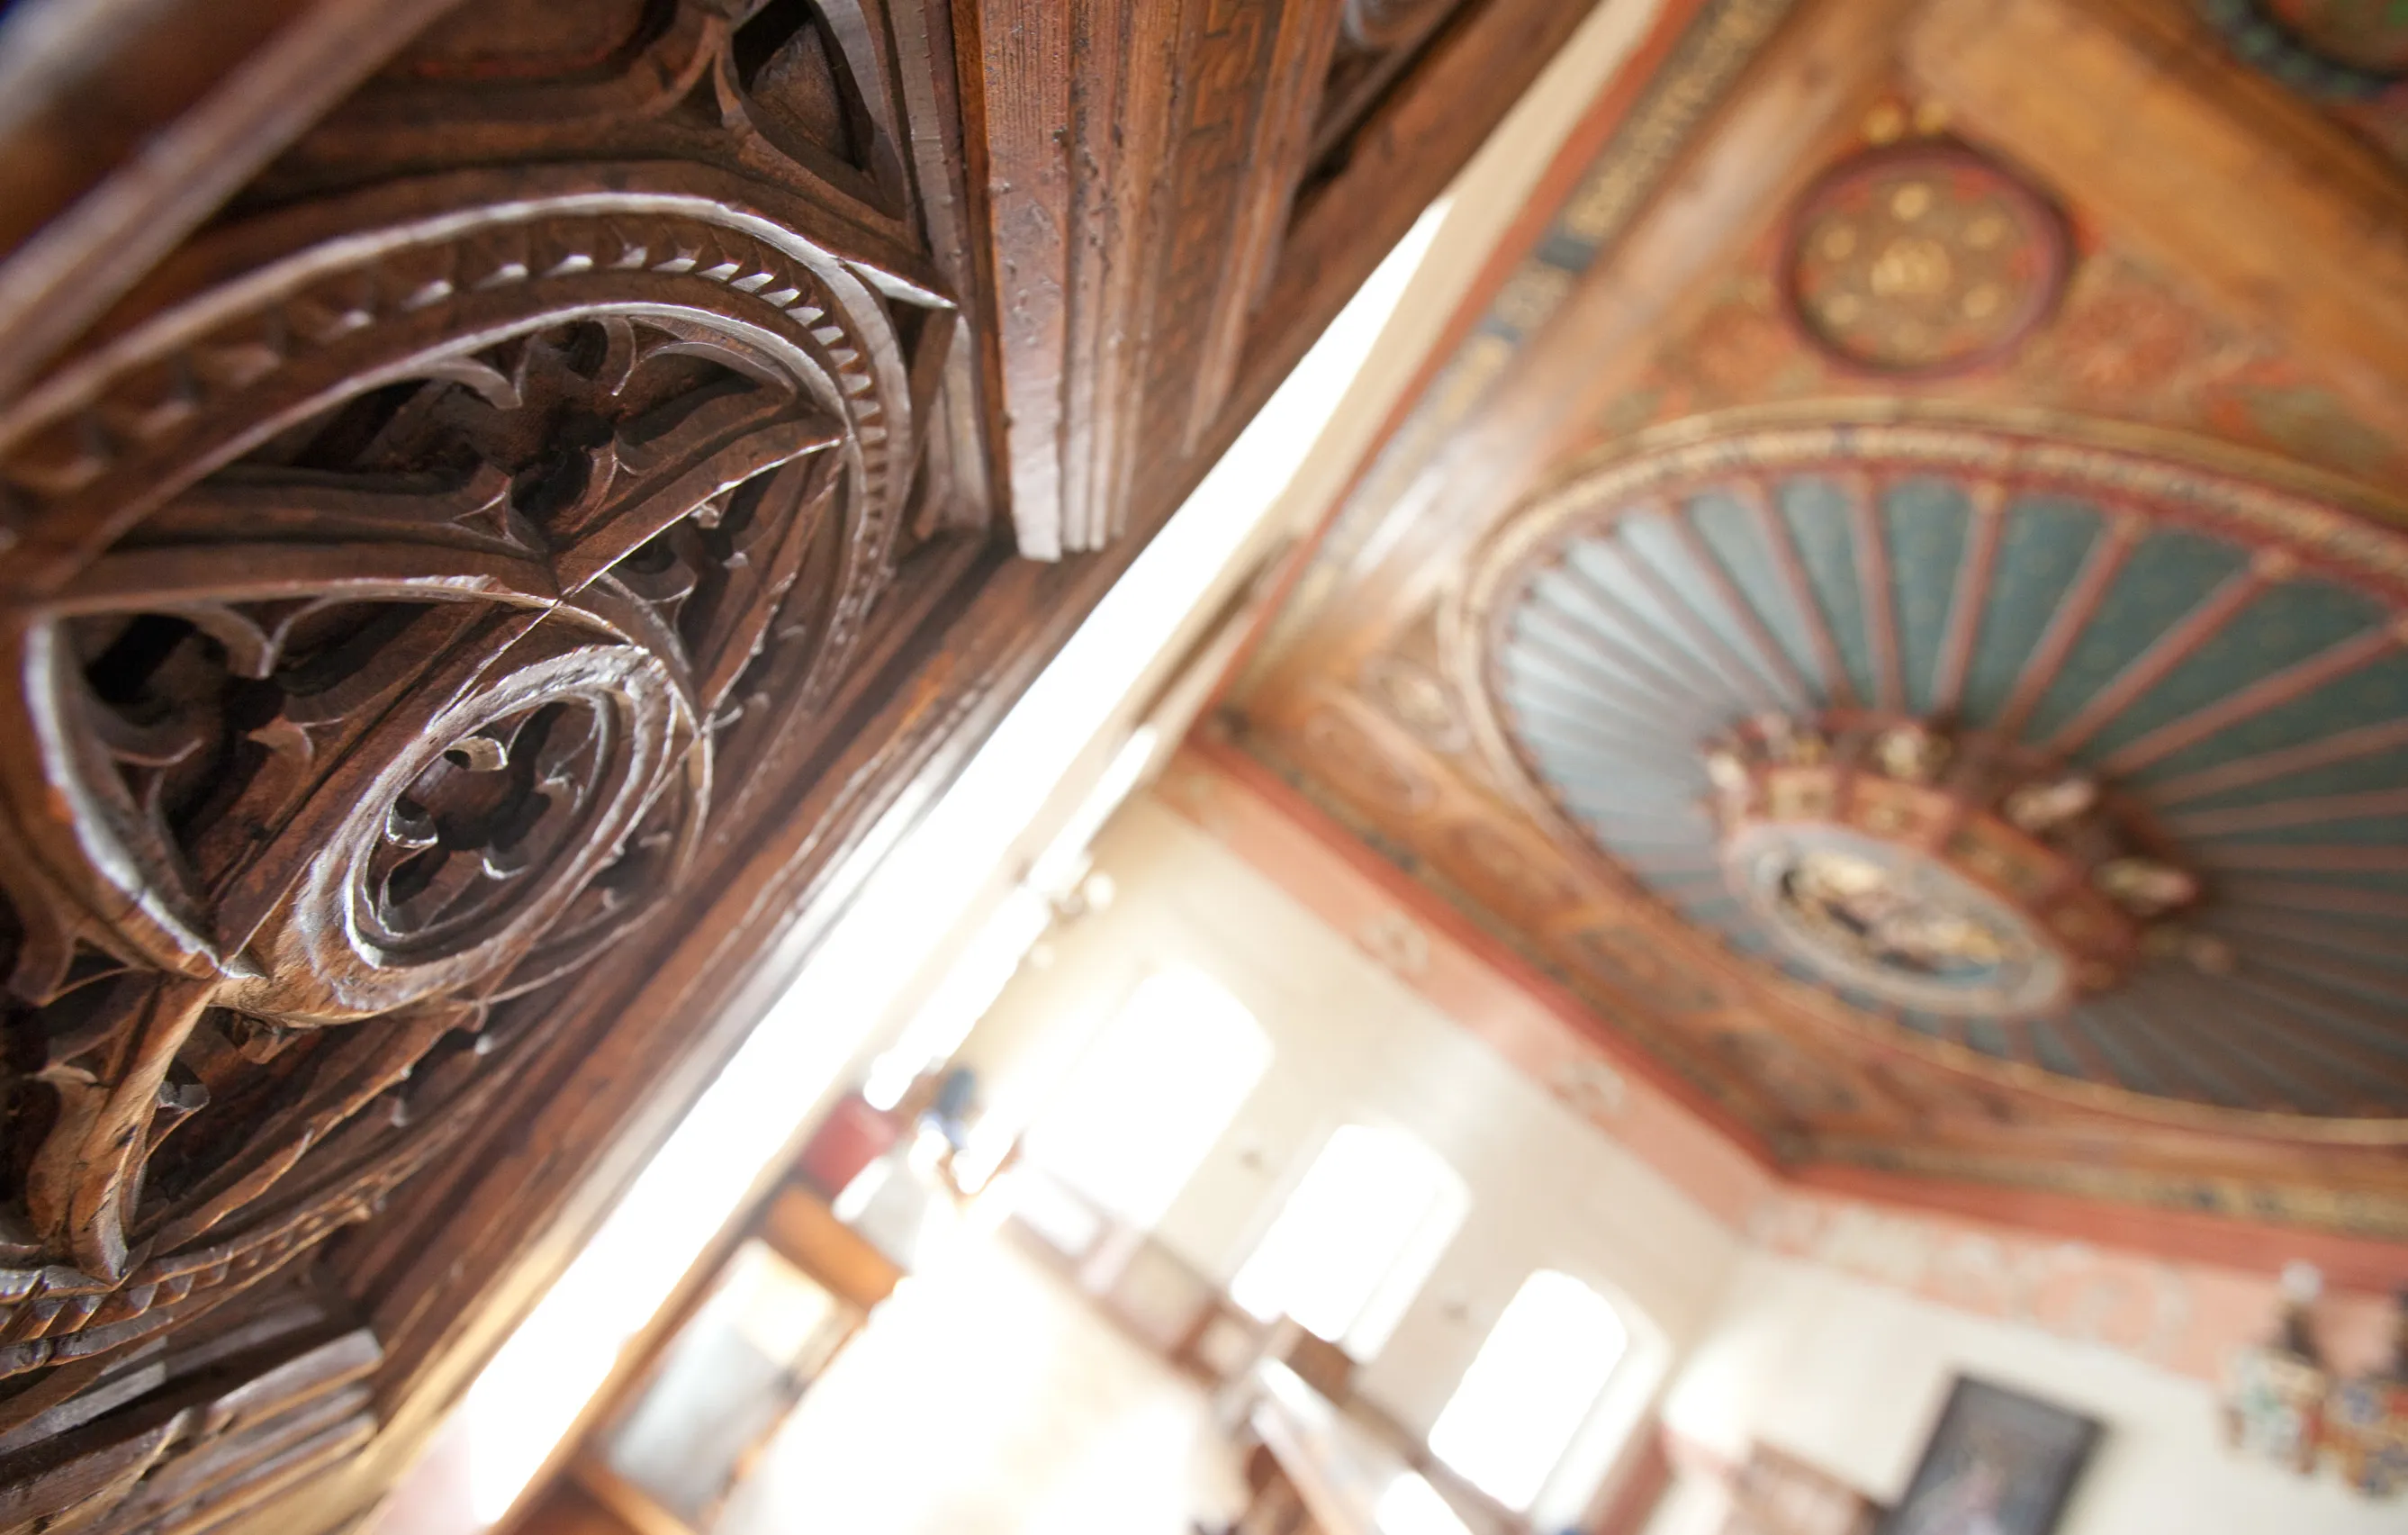 Carved wood, painted ceiling, historical architecture.